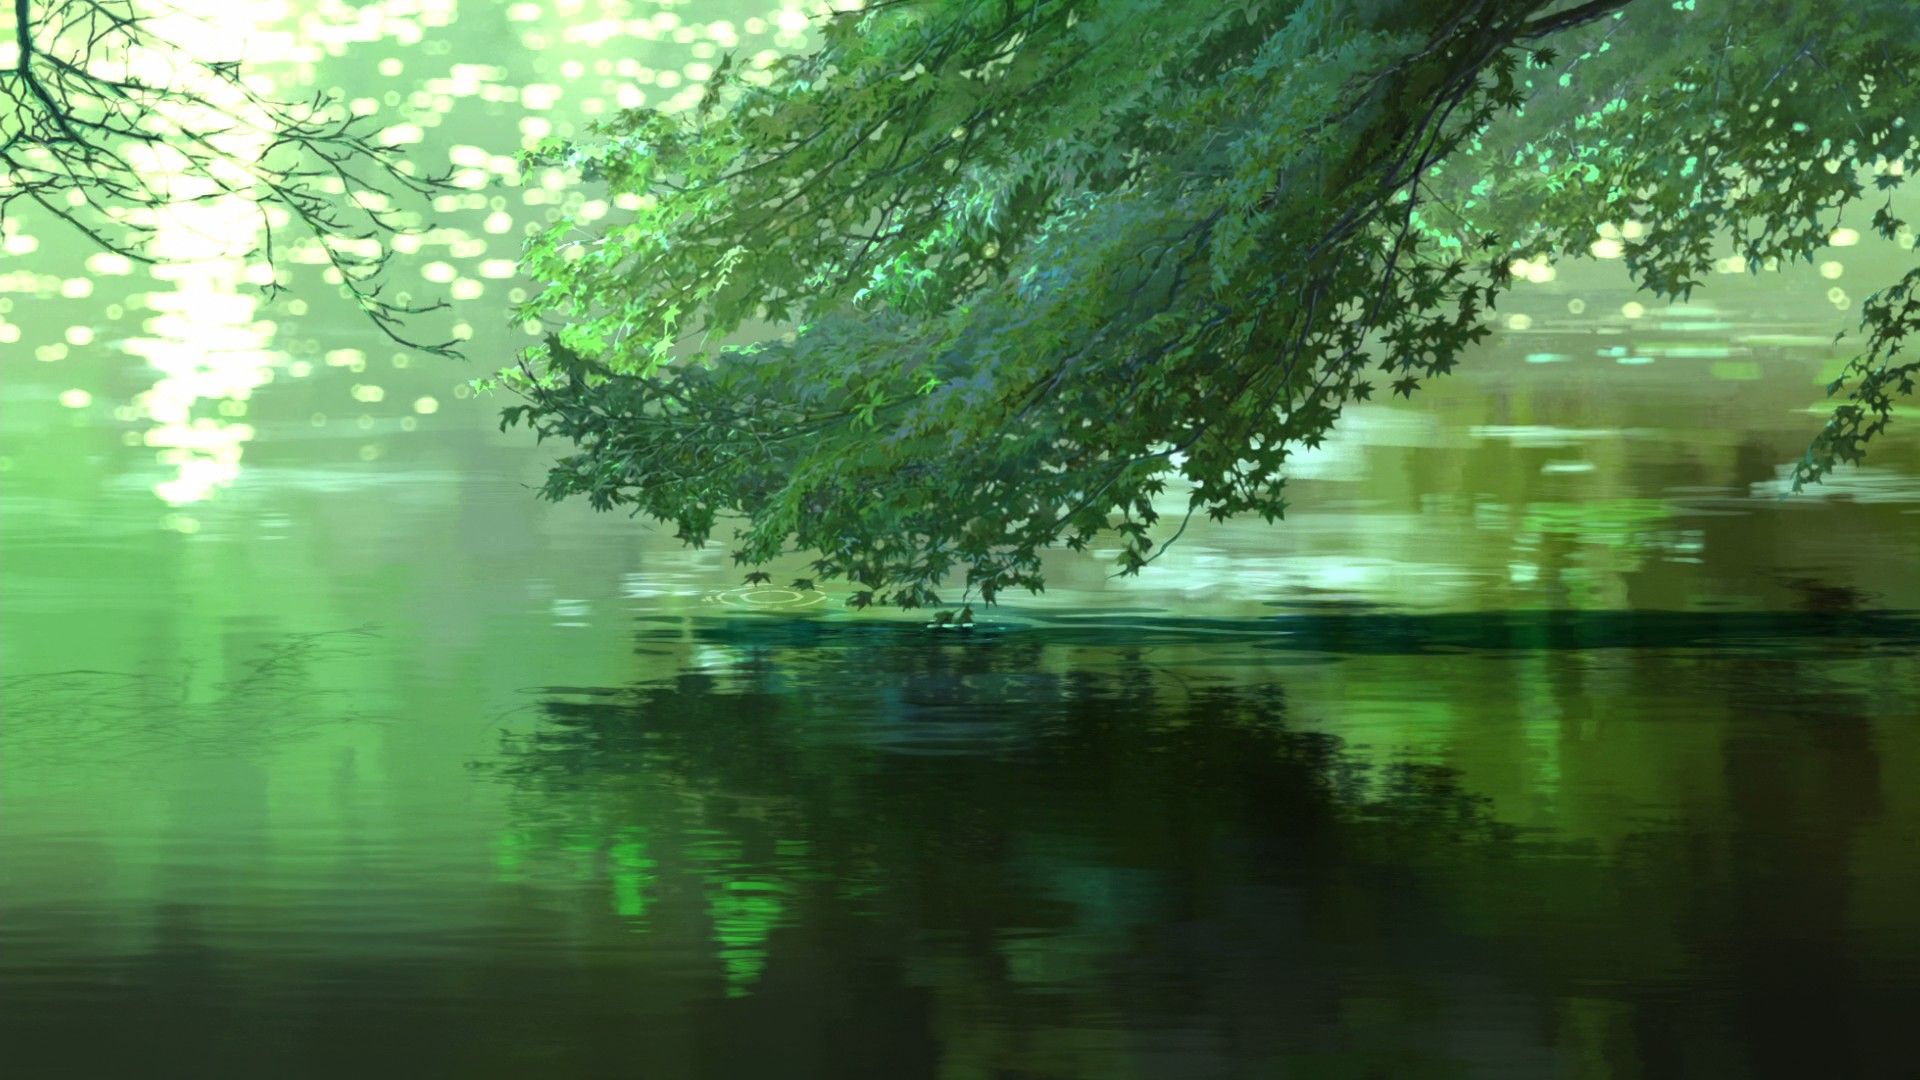 Green Anime Scenery Wallpaper 4K Anime Wallpaper Hd | Images And Photos